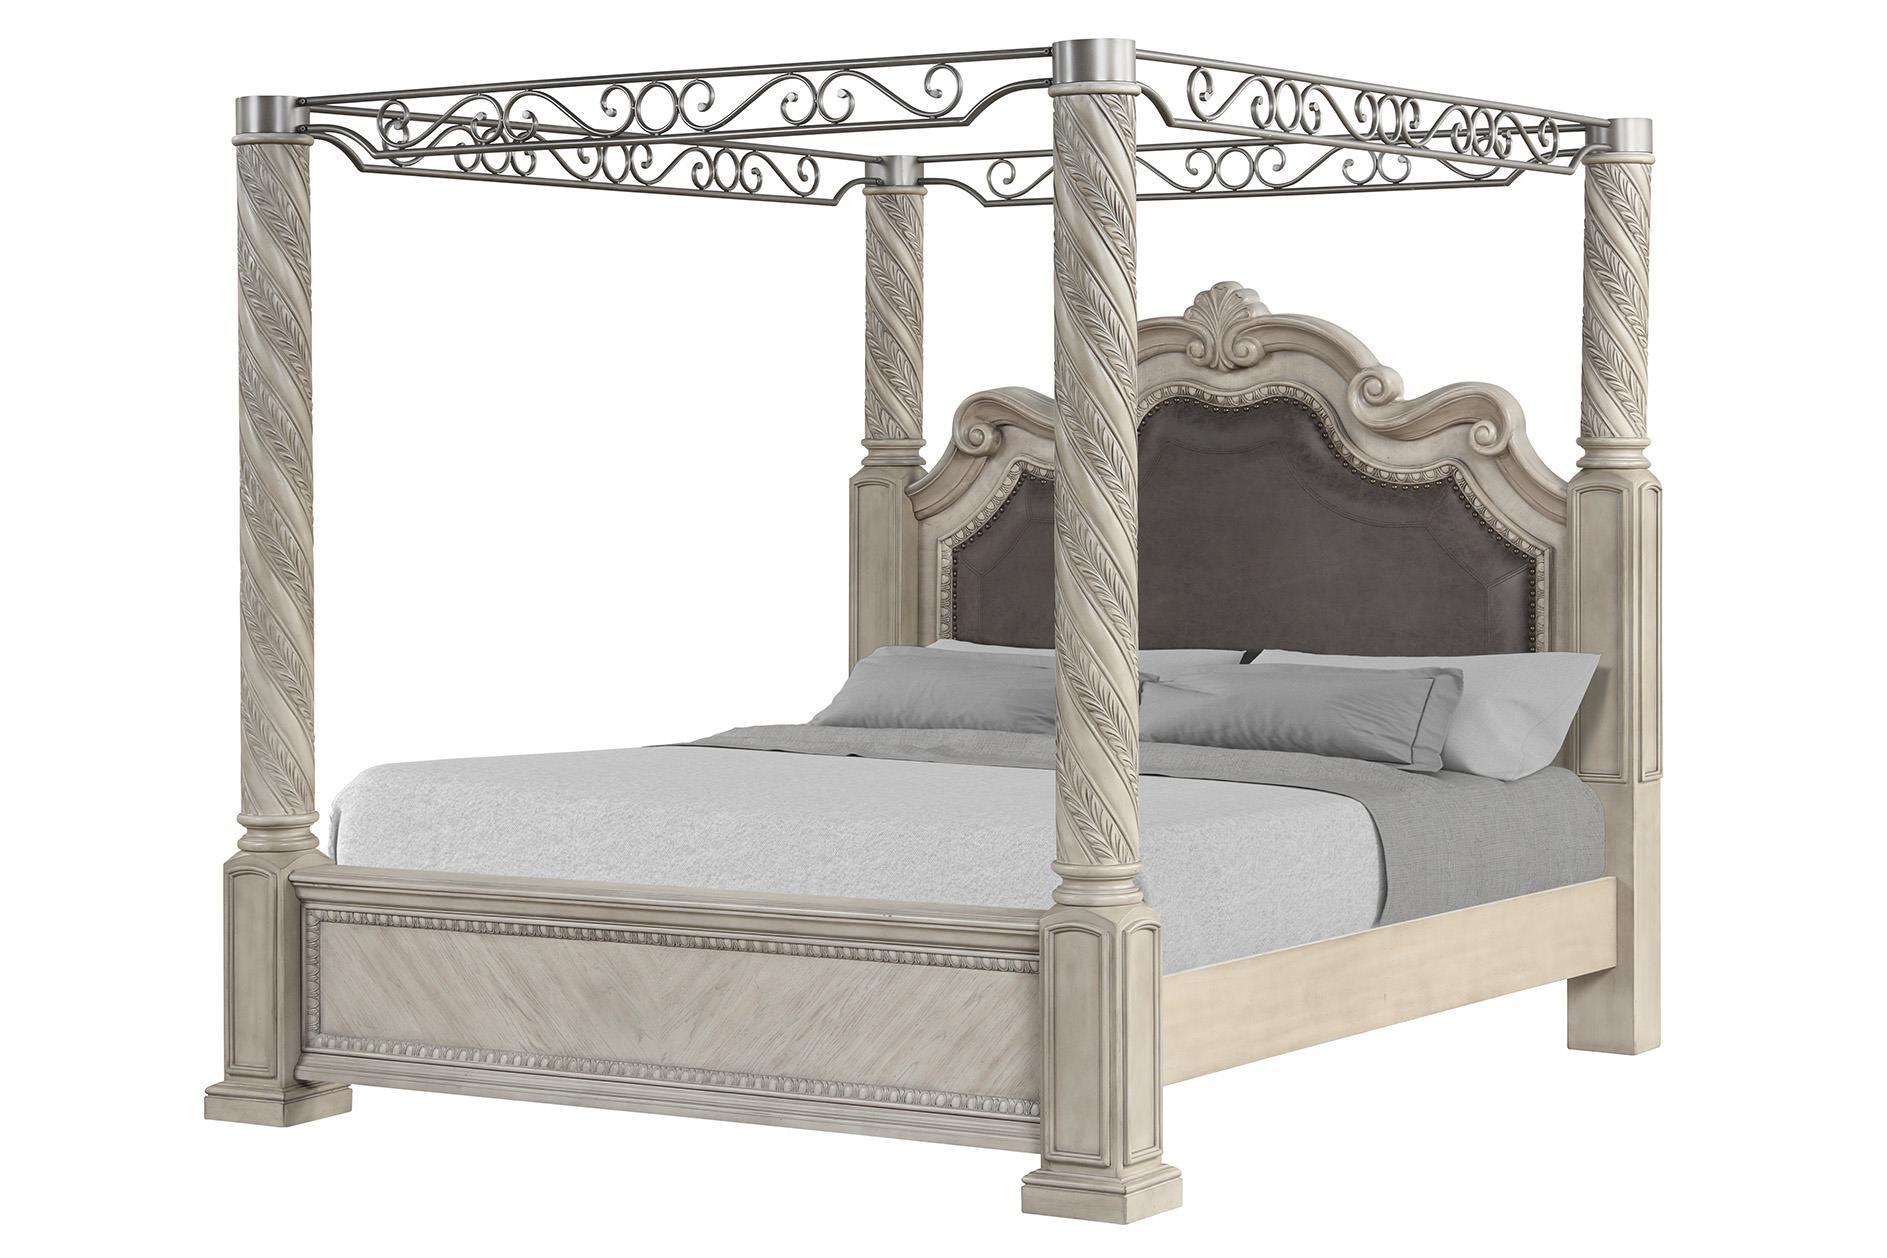 Modern, Transitional Canopy Bed COVENTRY 1989-108 1989-108 in Gray Bonded Leather